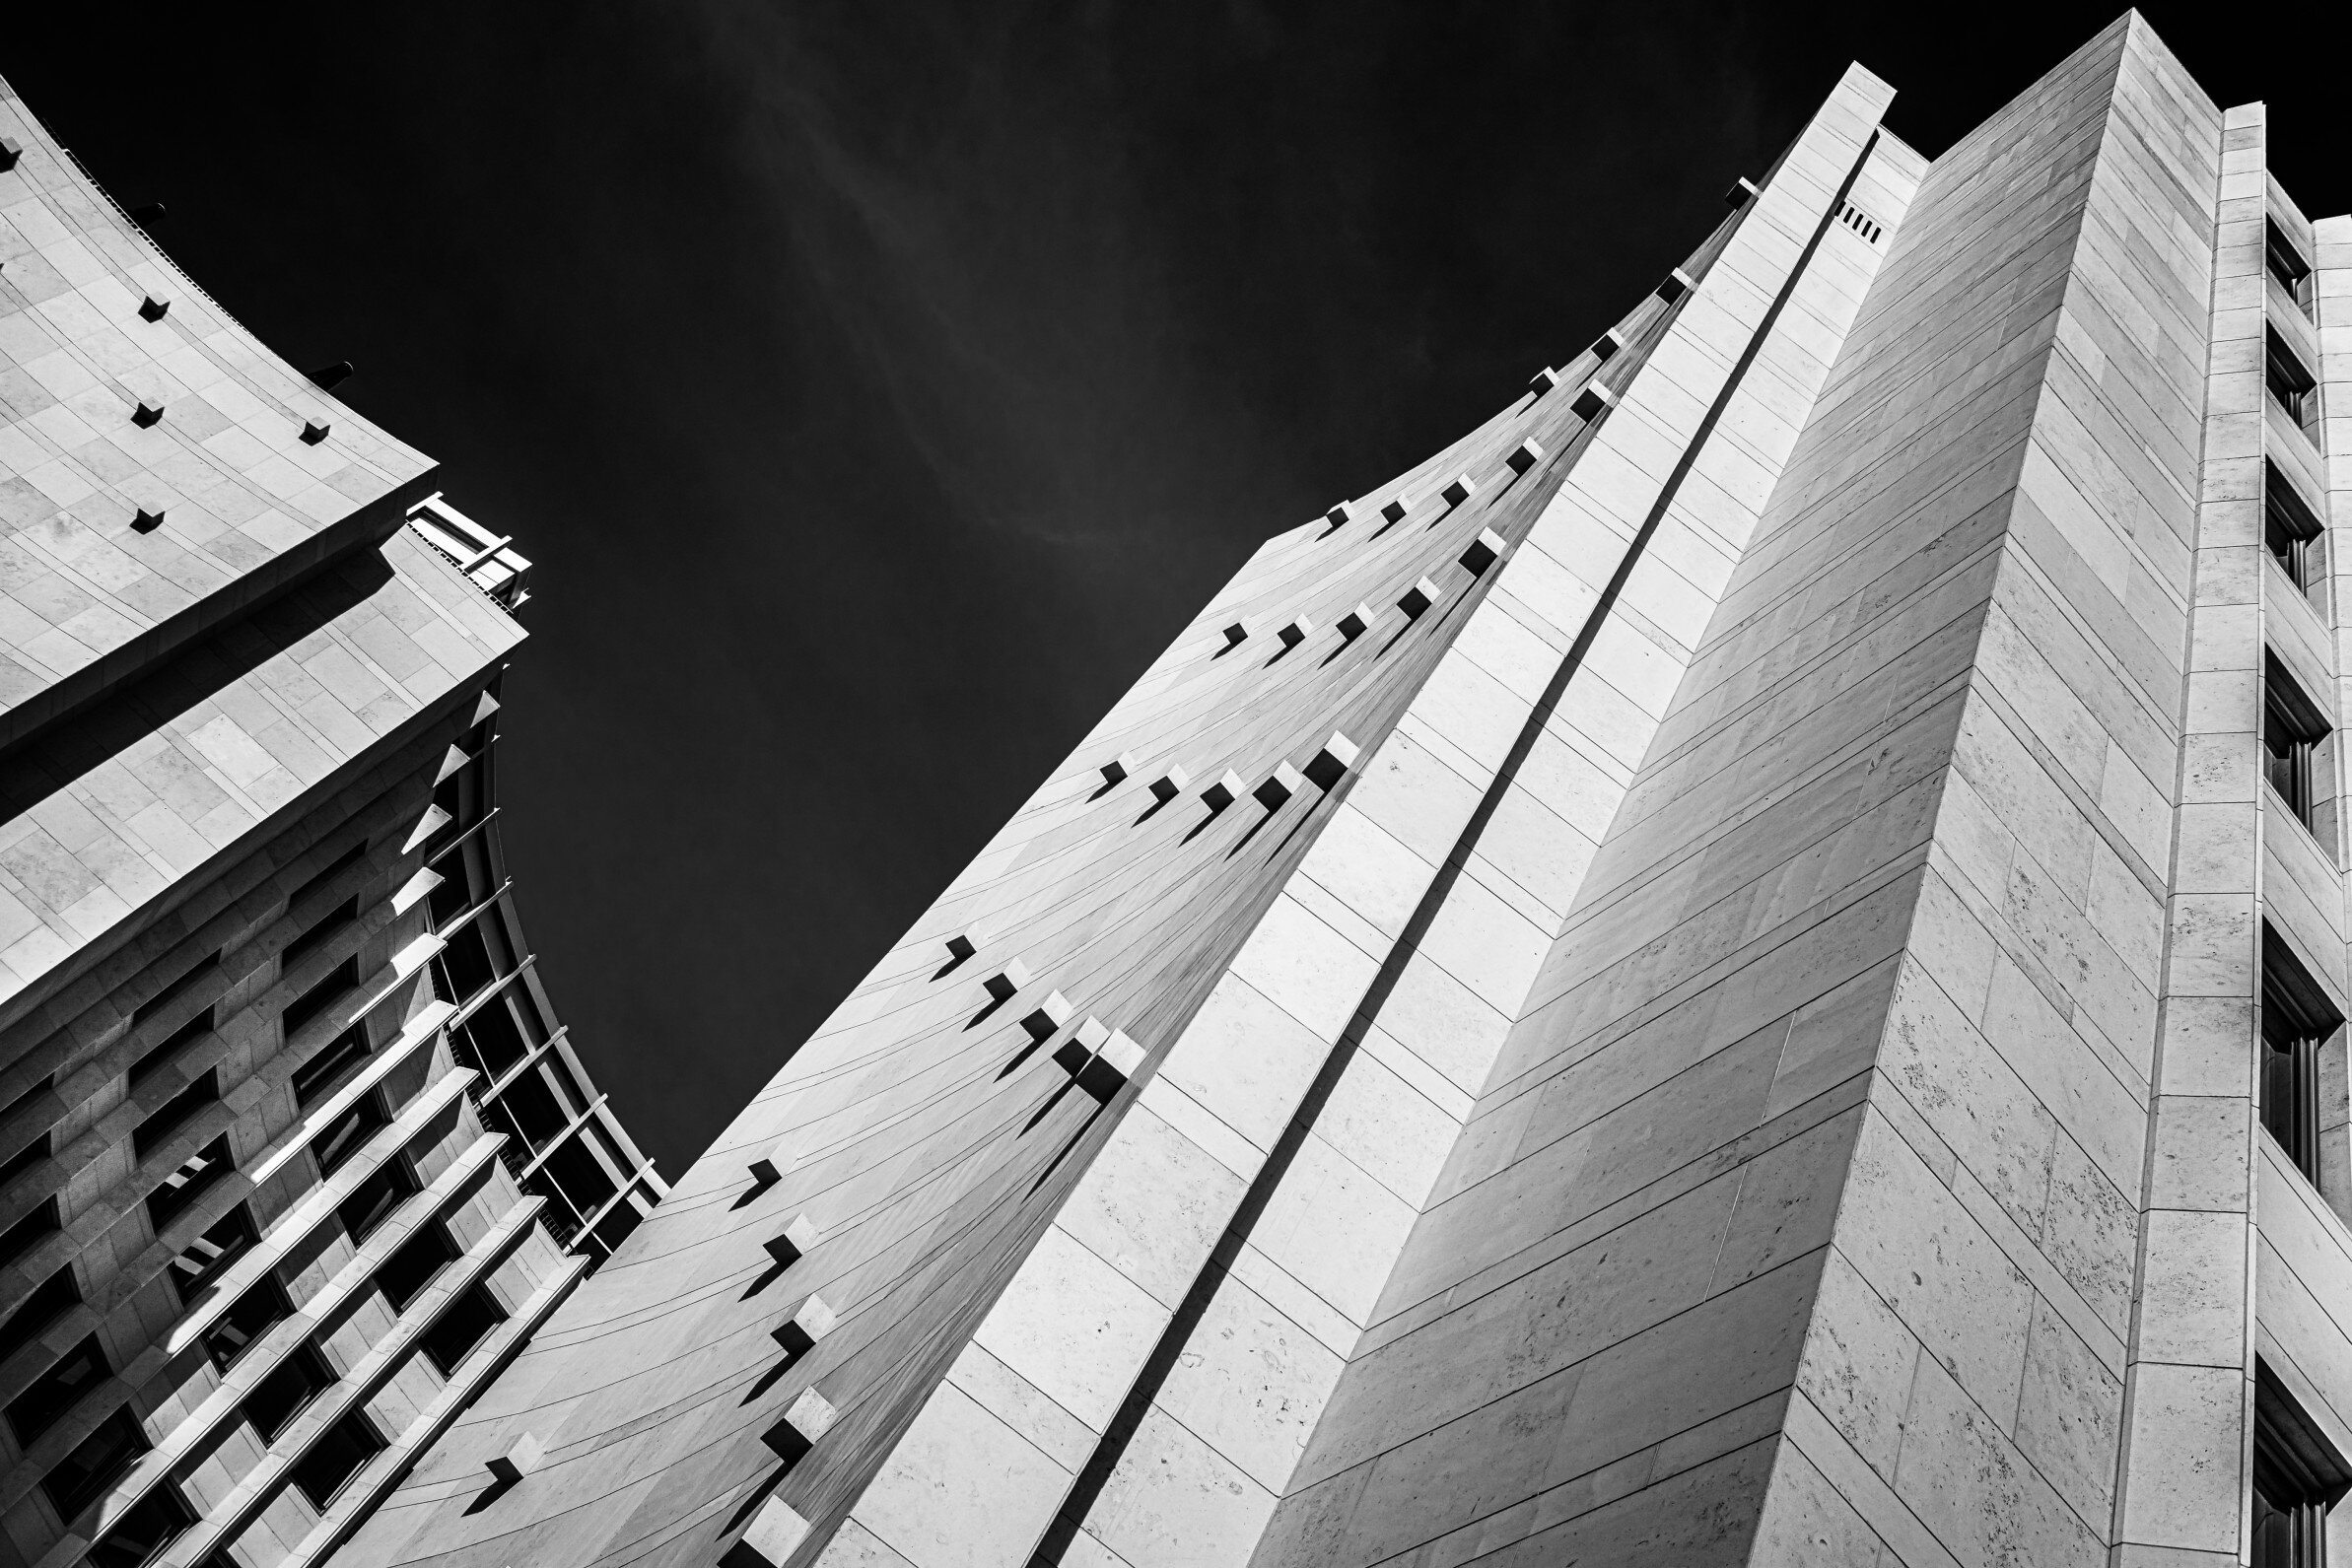 Architectural photography